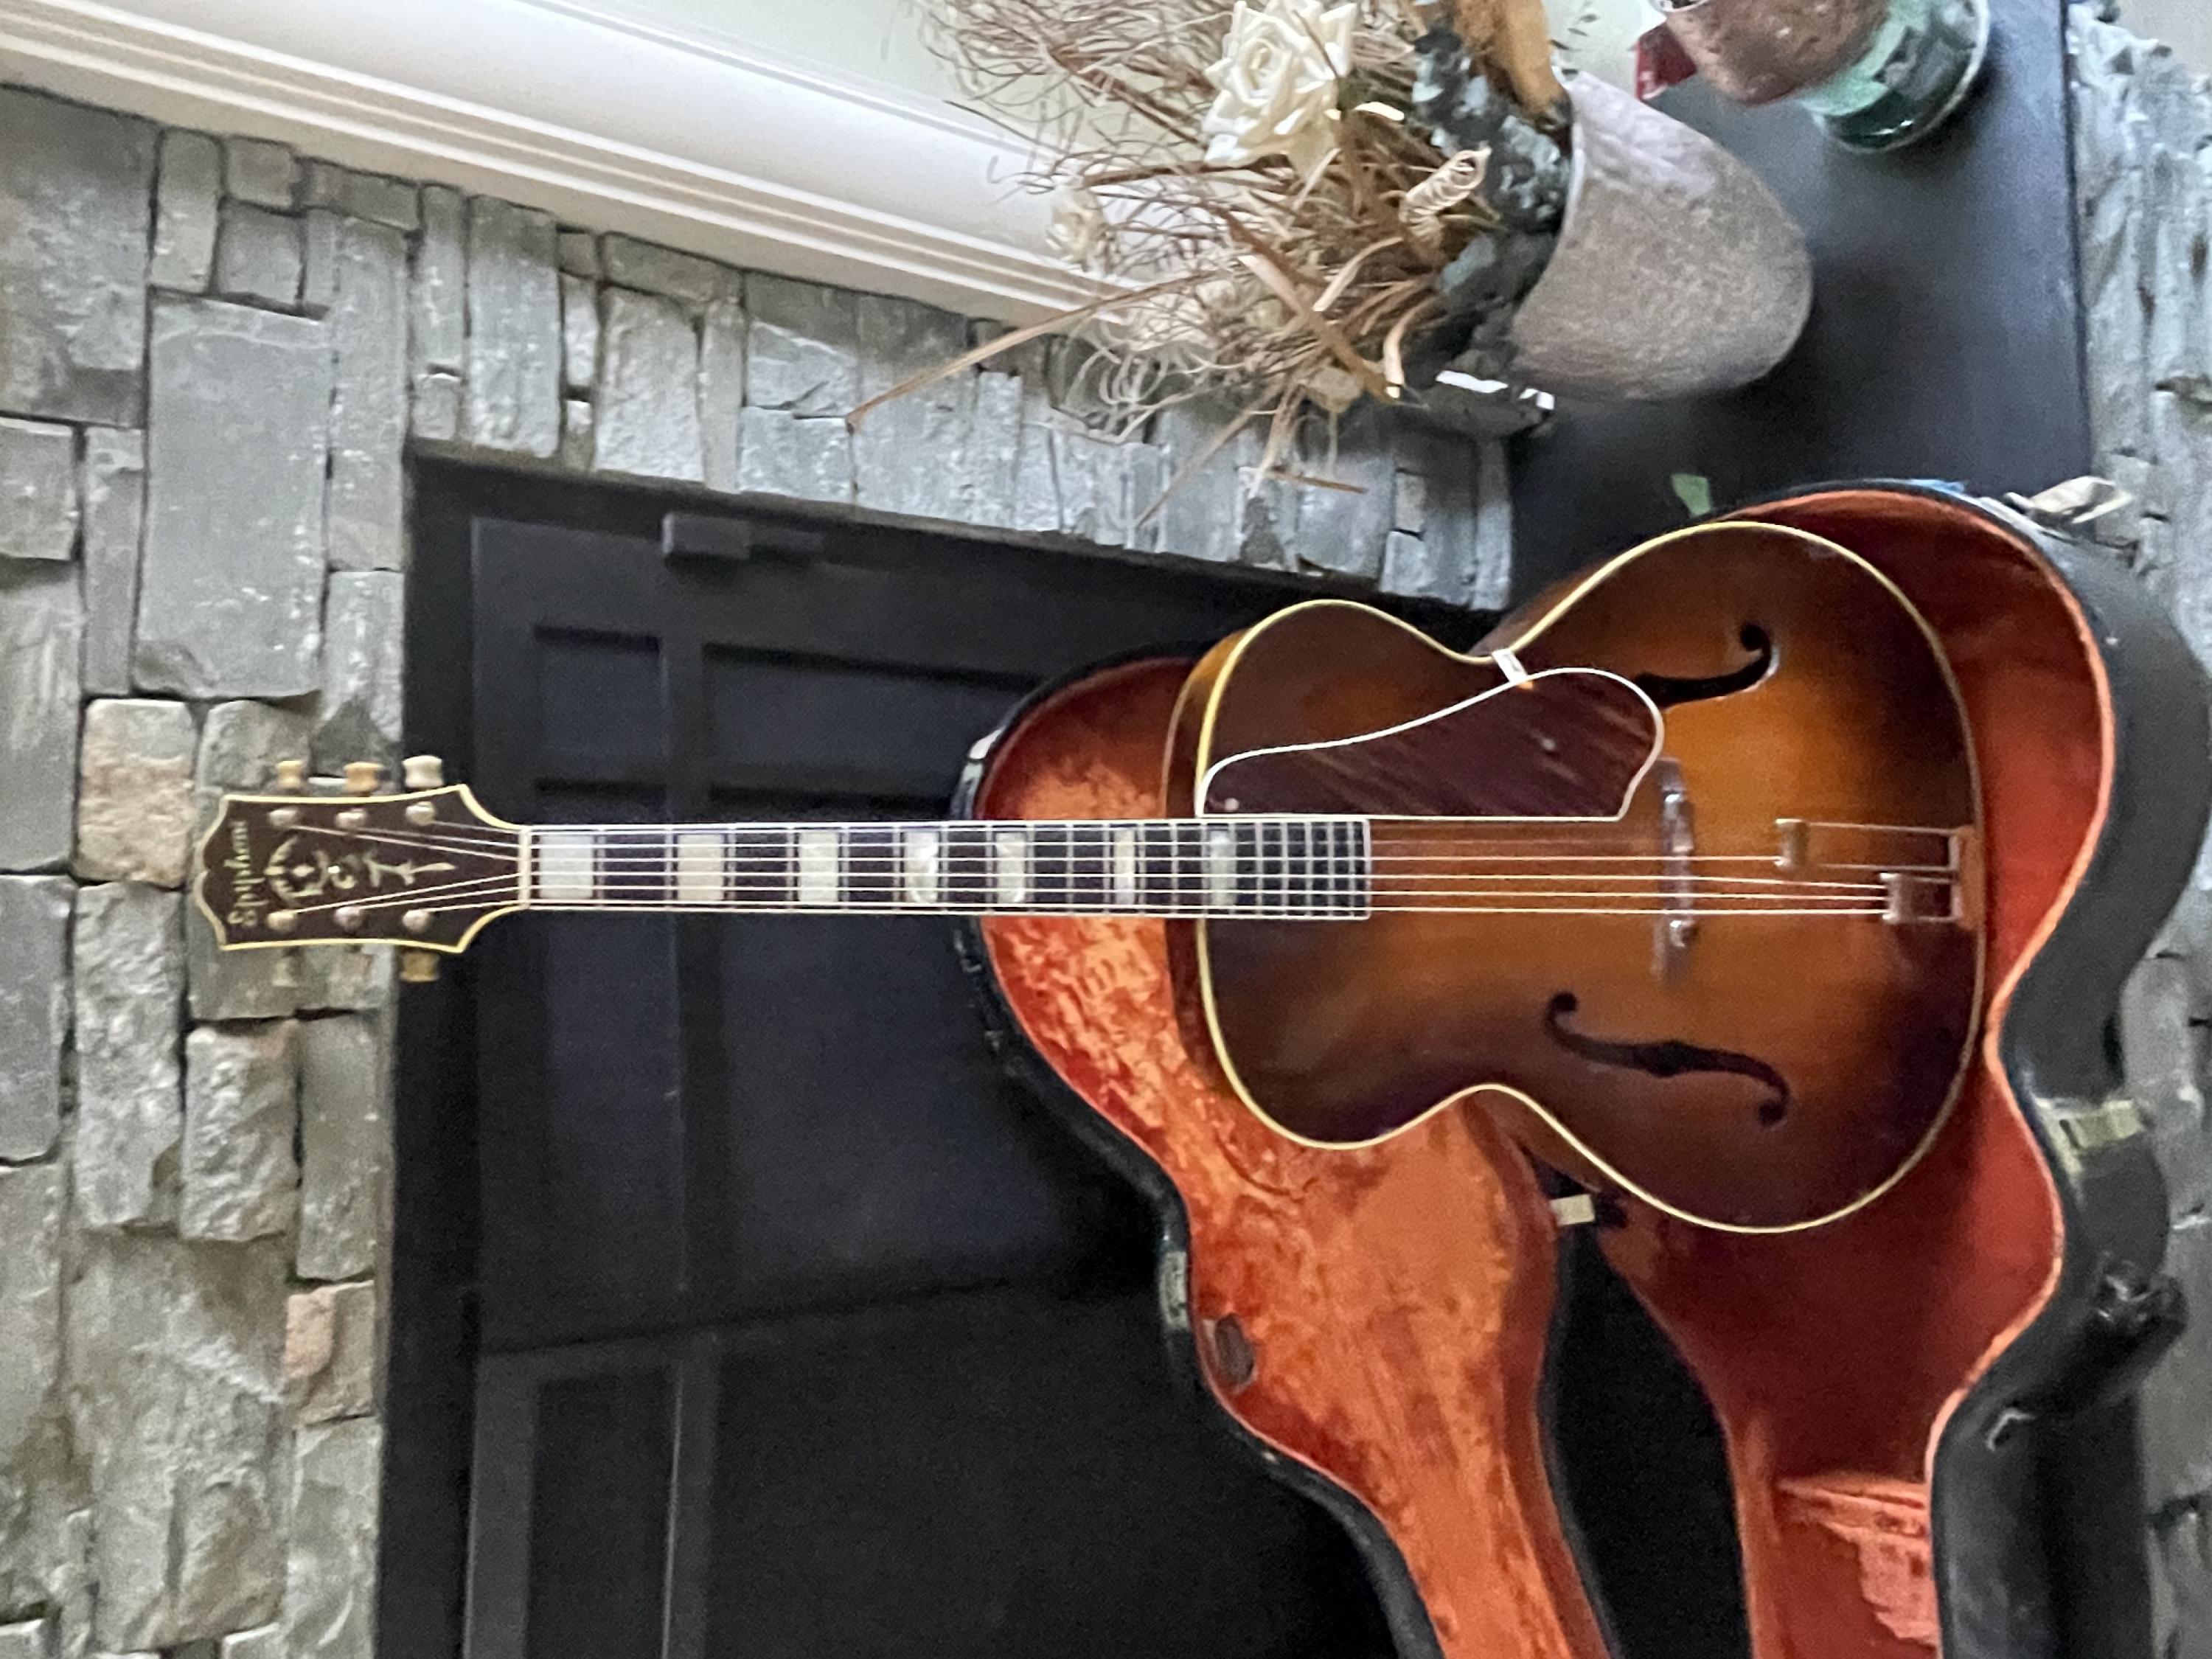 1947 Epiphone Broadway with split in back. Need Luthier in NJ, PA area-795310ca-b16a-408c-823e-735521c3f121-jpg